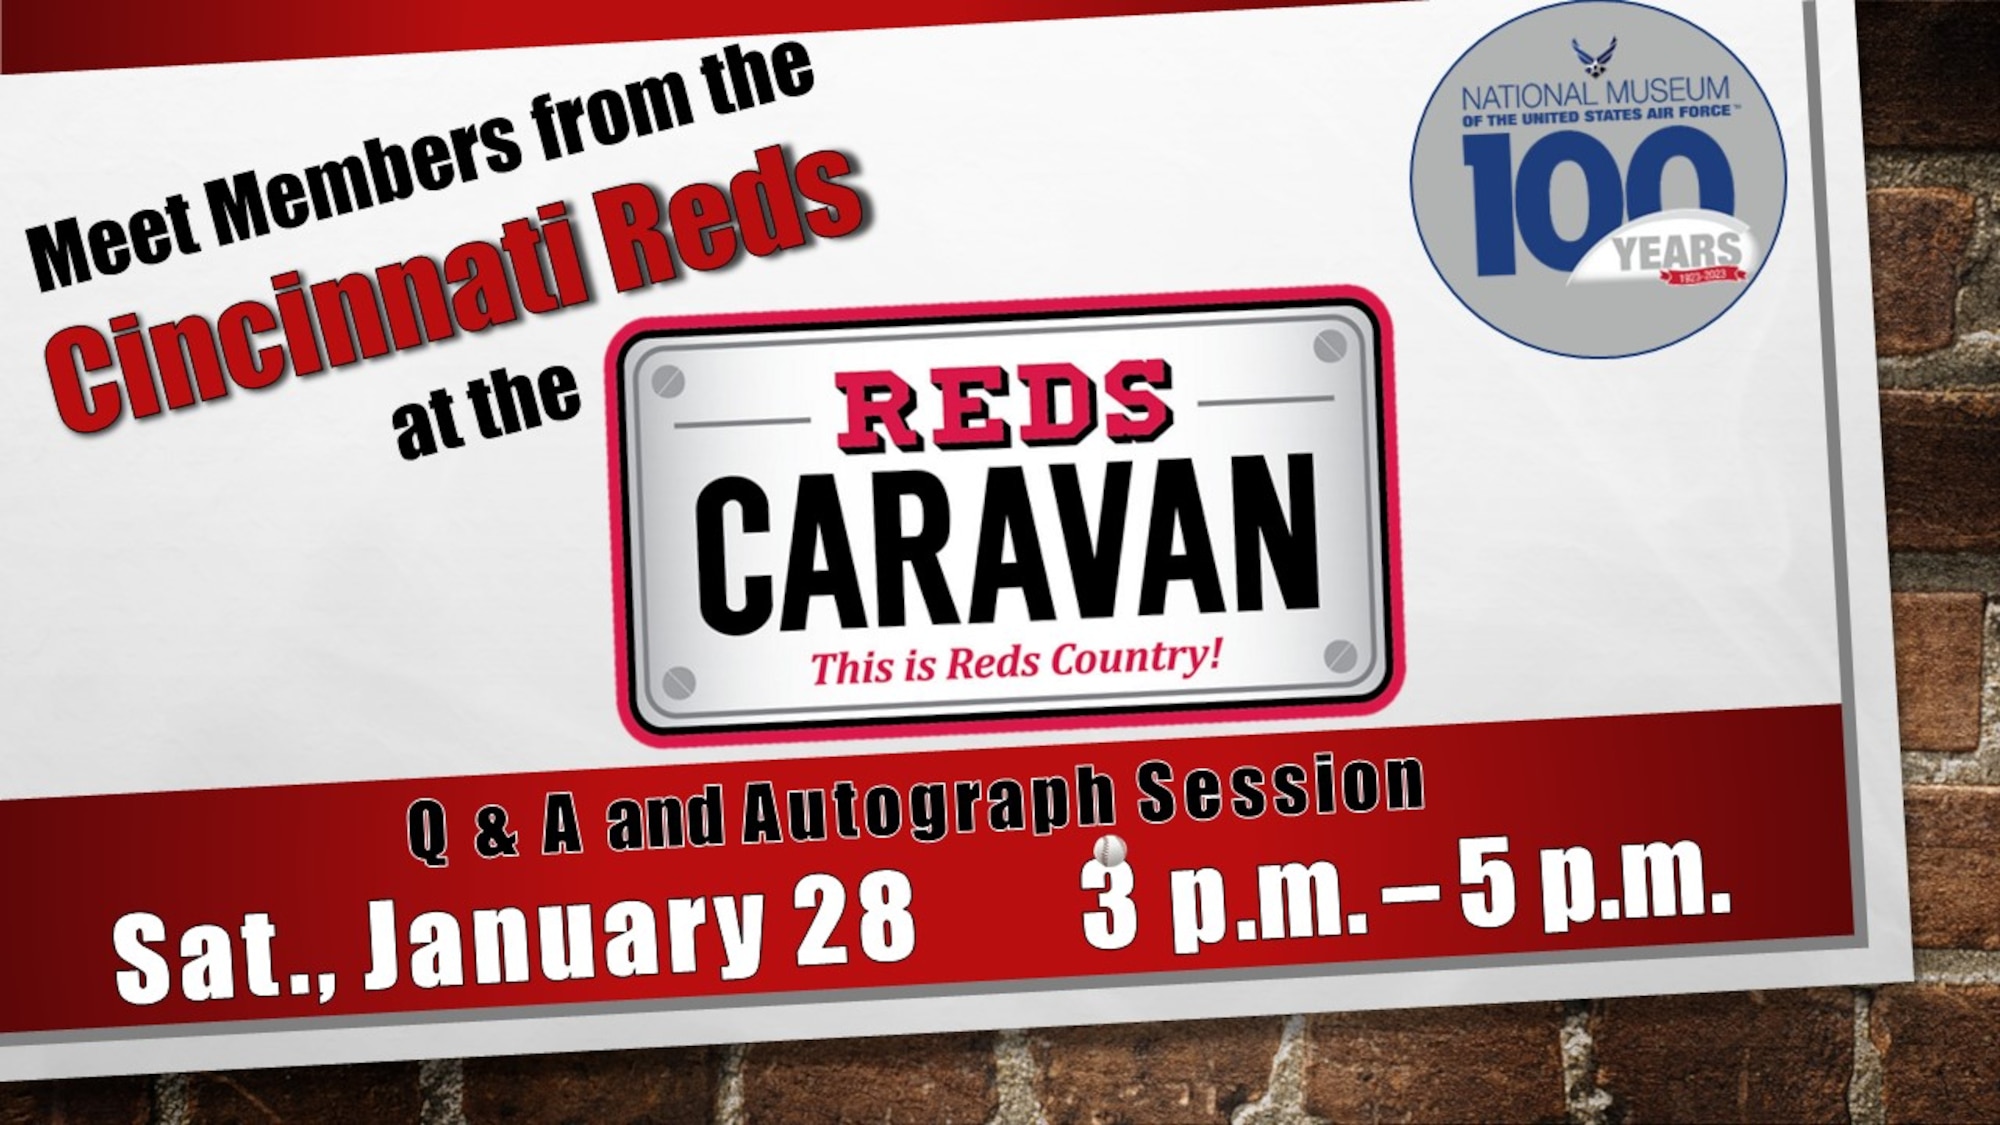 National Museum of the U.S. Air Force visitors will have the opportunity to meet members of the Cincinnati Reds organization on Jan. 28 from 3 p.m. – 5 p.m.